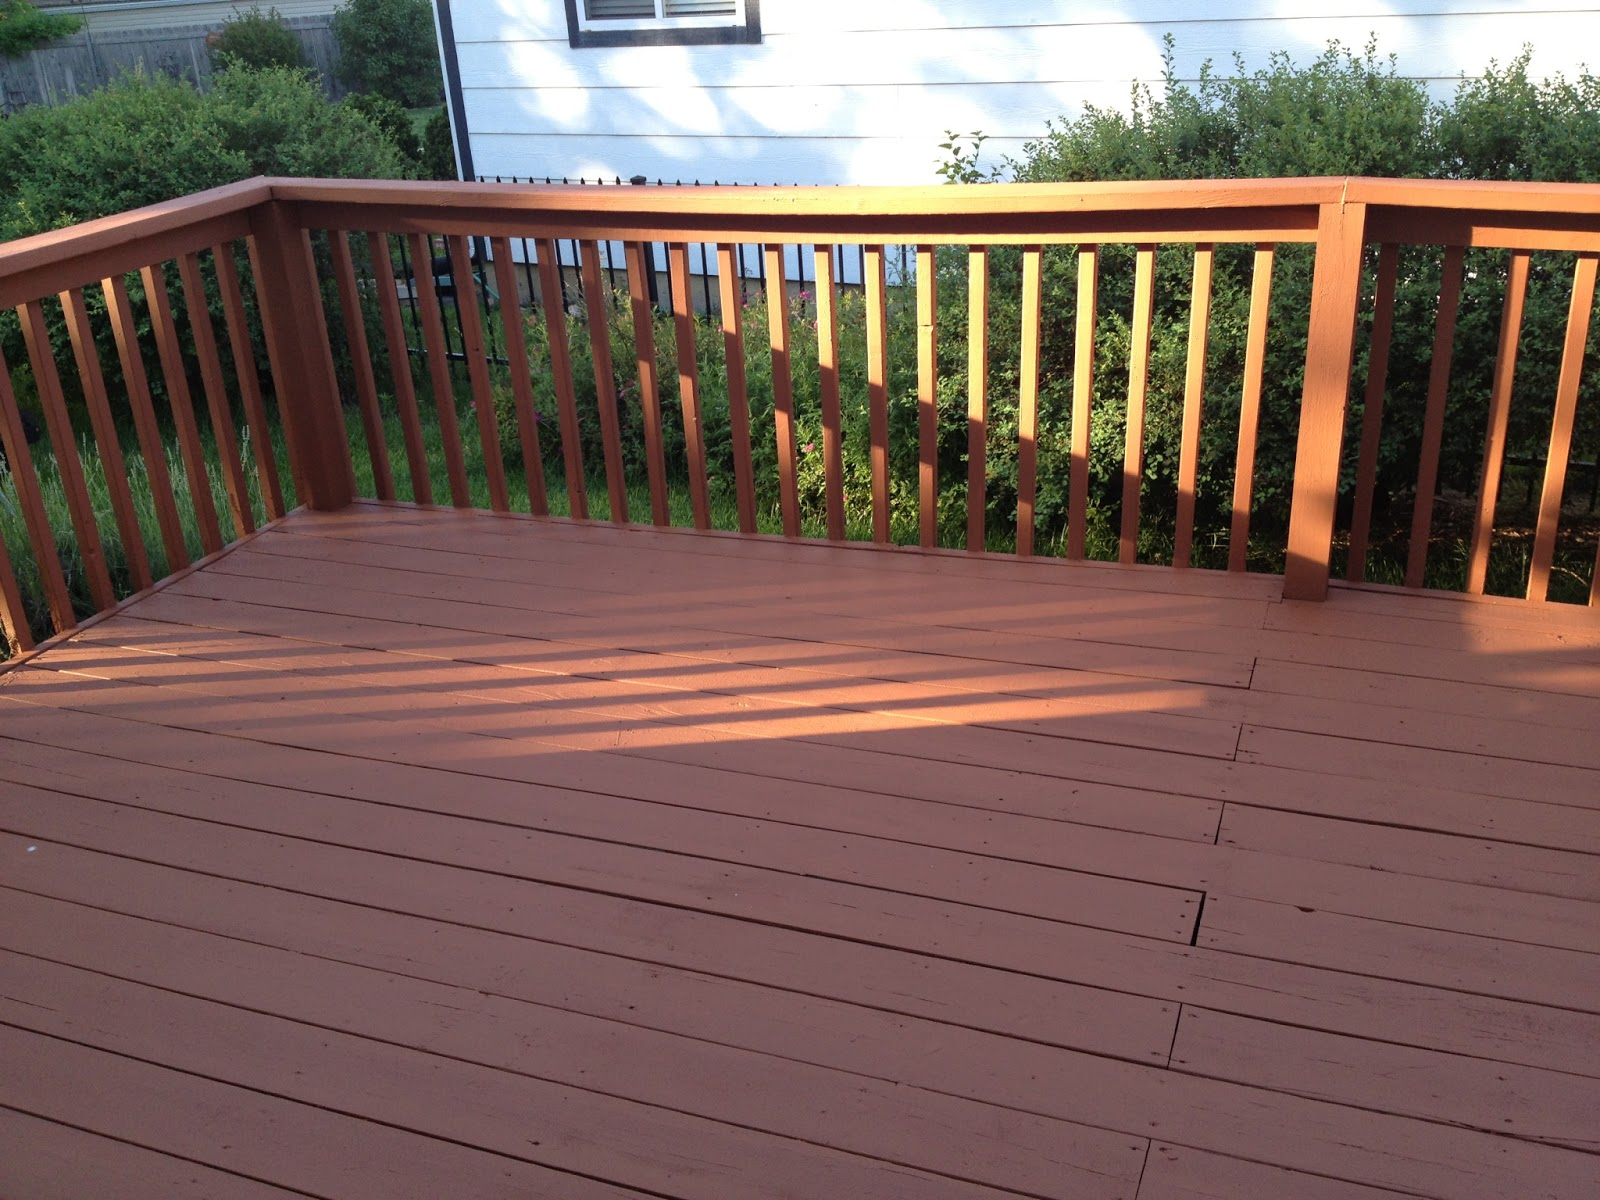 Decking Interesting Home Decking With Behr Deckover Reviews intended for sizing 1600 X 1200